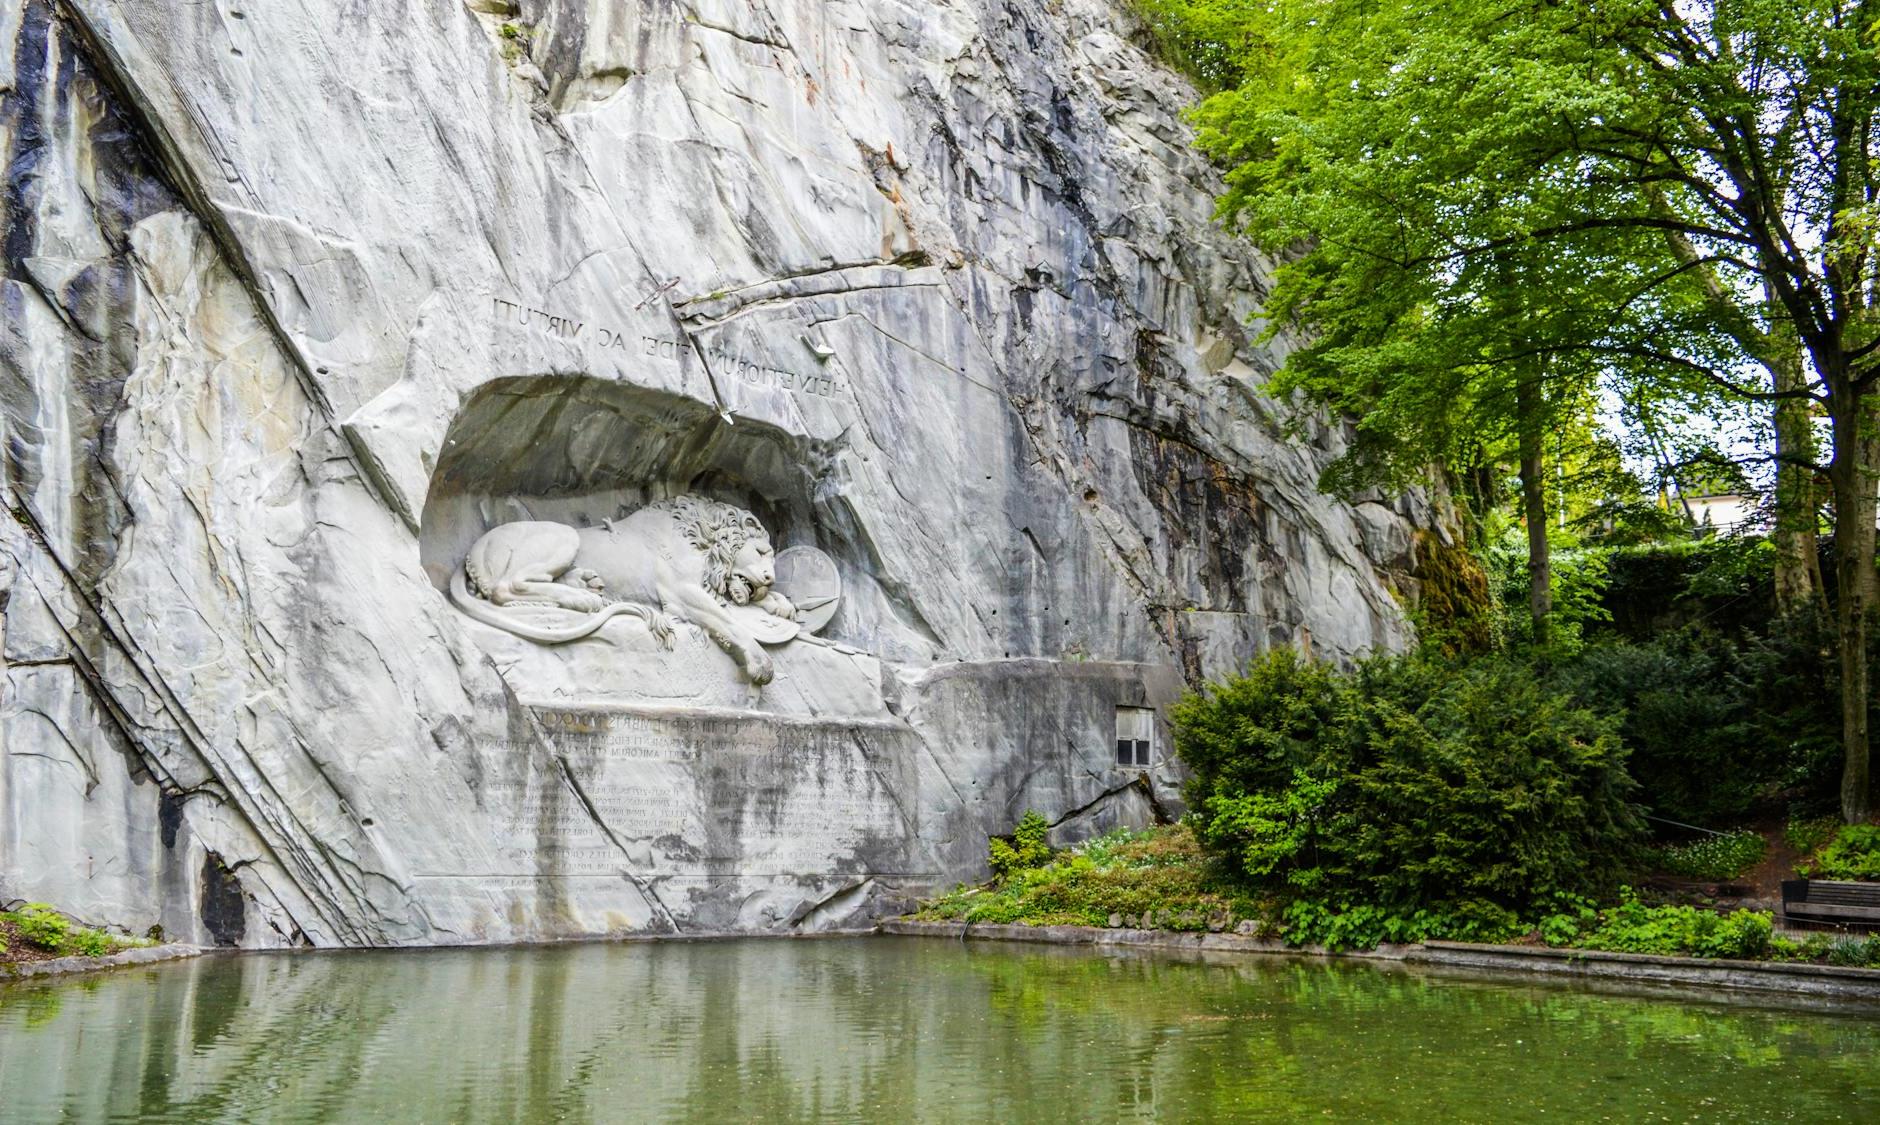 Sculpture of a mortally wounded lion carved into sheer rock ledge near pond located in Switzerland